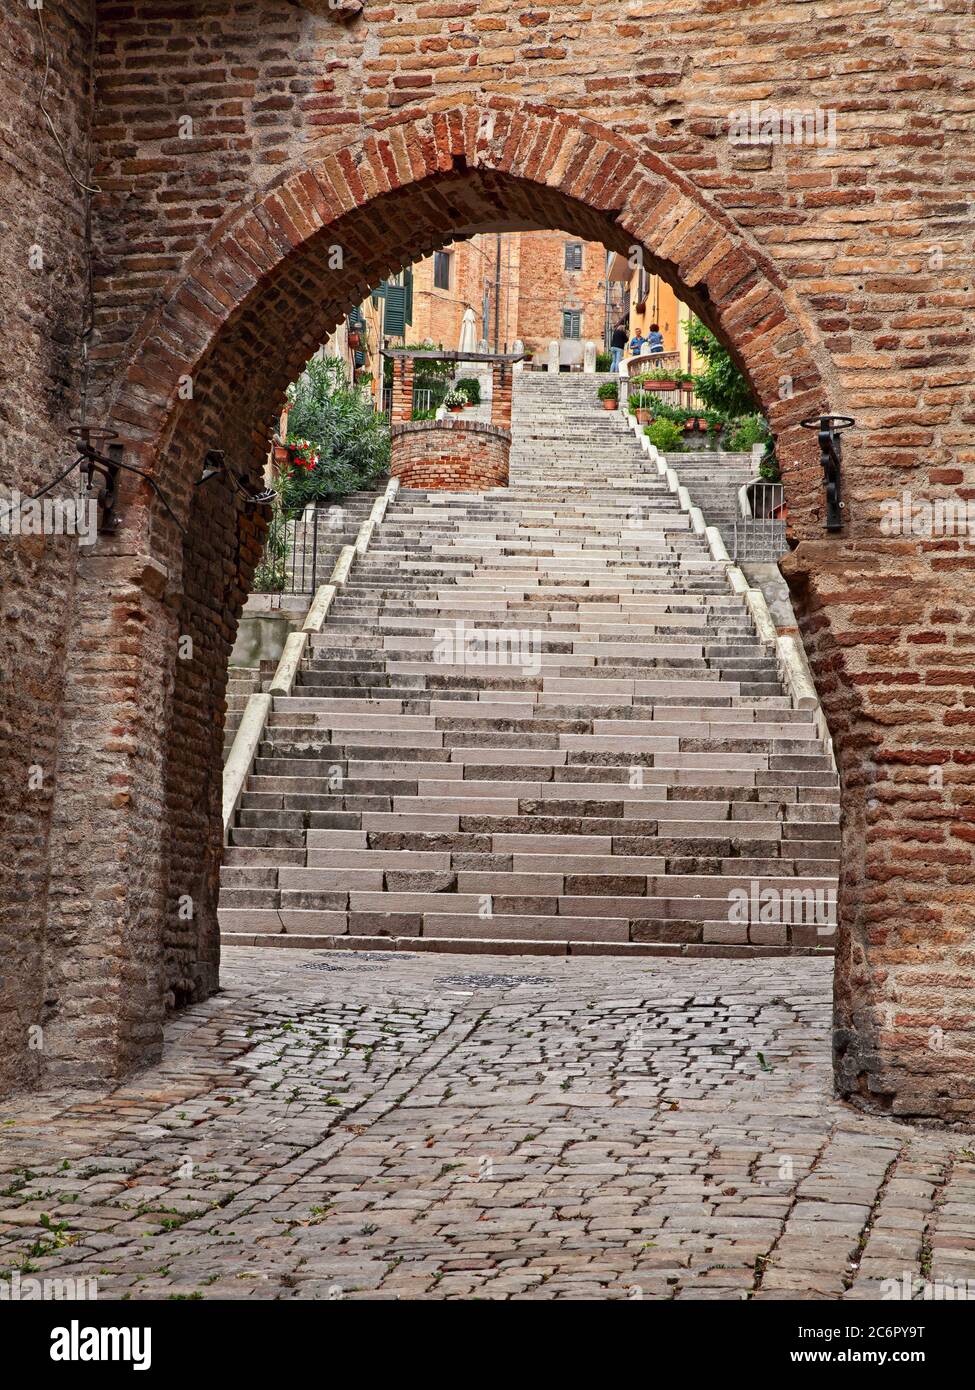 Corinaldo, Ancona, Marche, Italy: entrance of the medieval town with the ancient long staircase and the famous Polenta water well Stock Photo